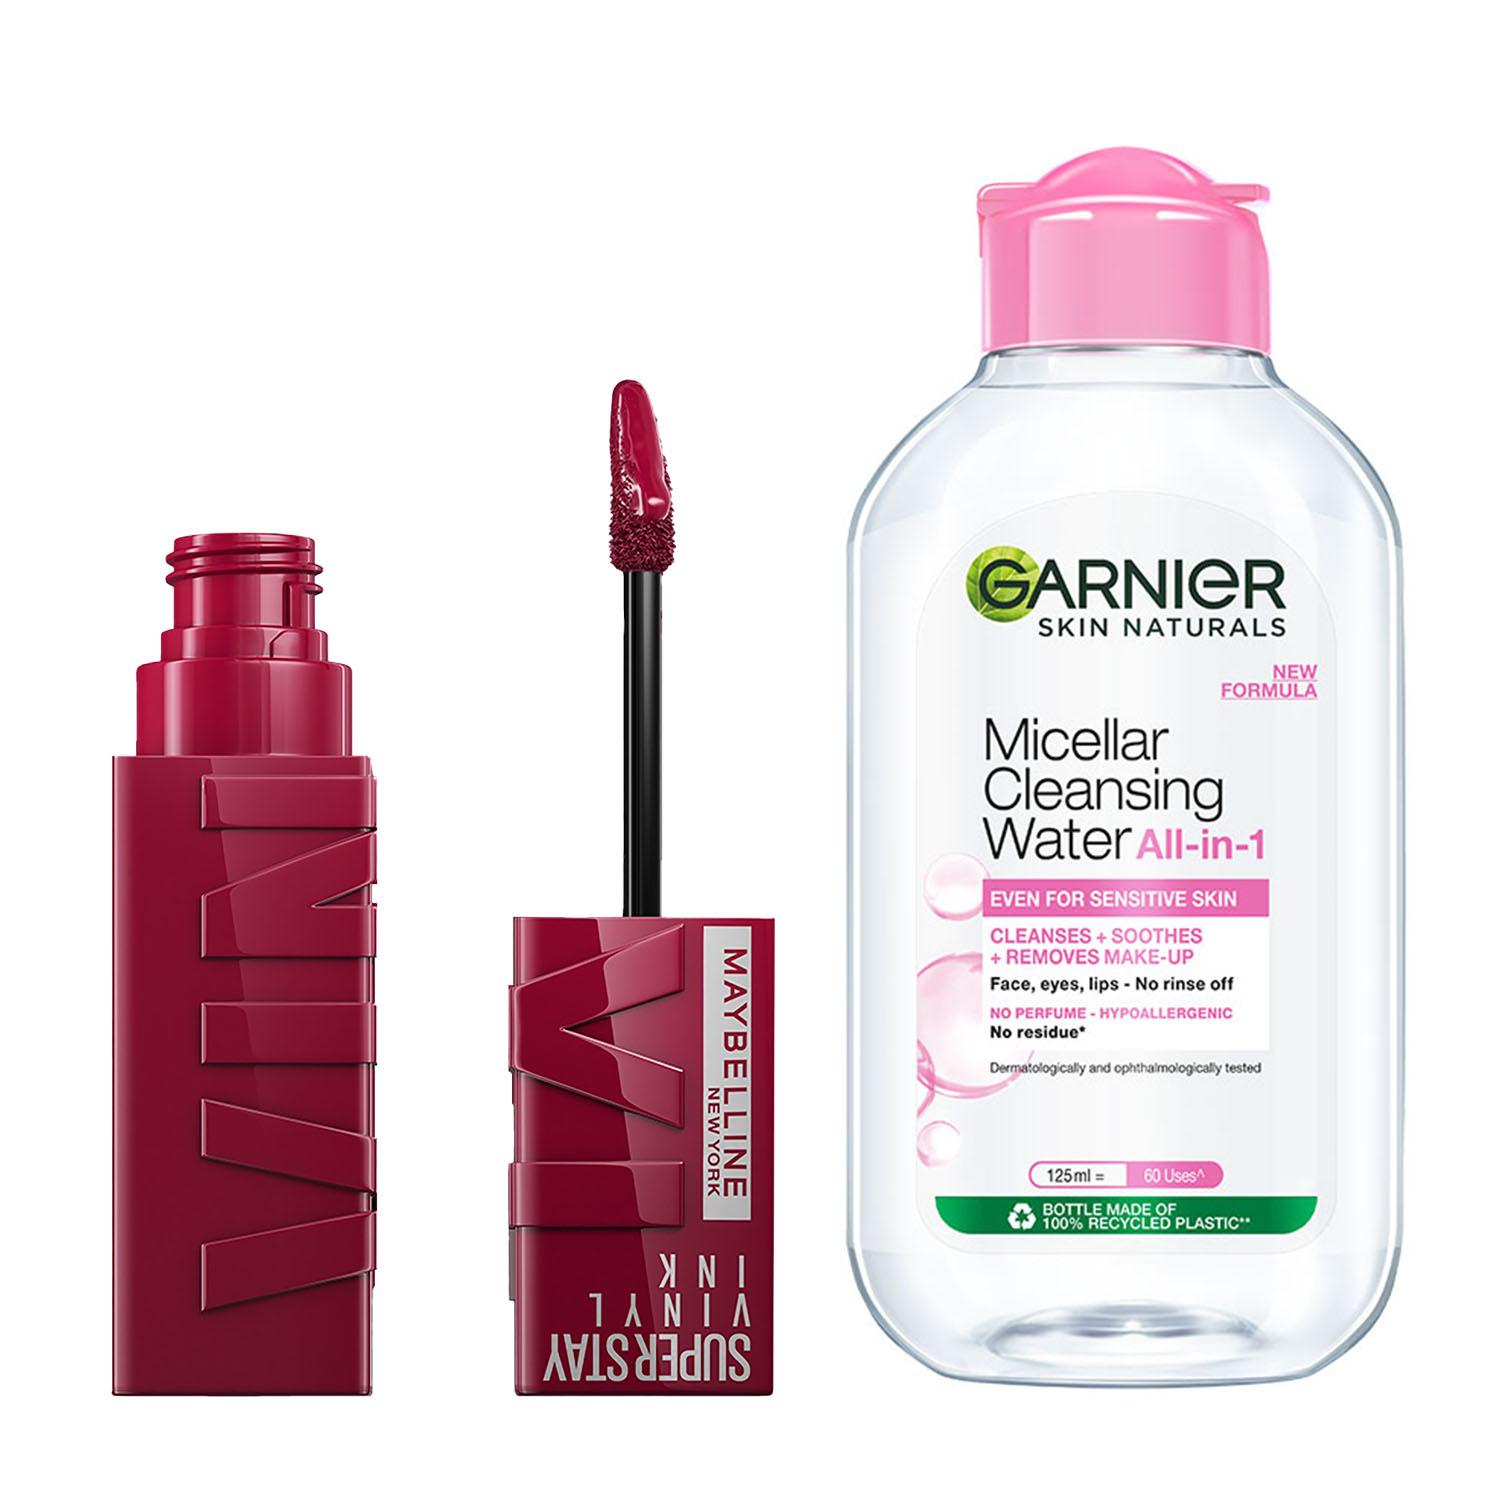 Maybelline Superstay Vinyl Ink Liquid Lipstick Unrivaled with Garnier Micellar Cleansing Water Combo